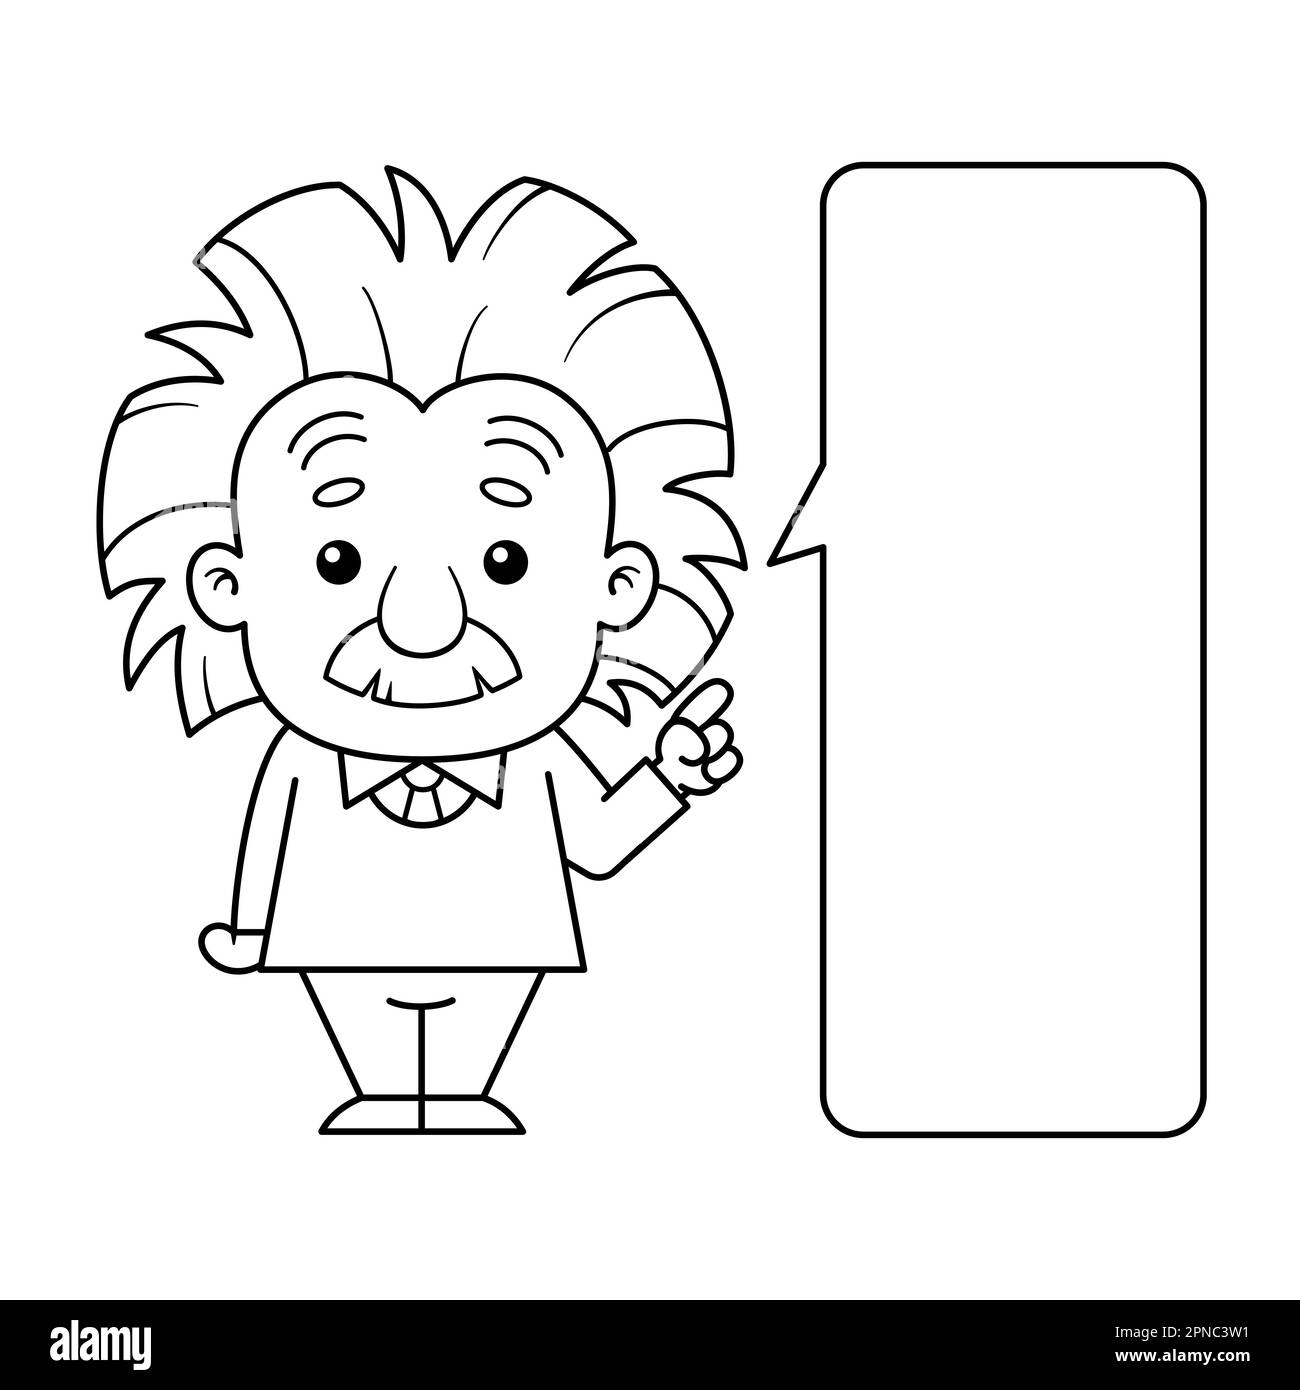 Black And White Albert Einstein Cartoon Character With Callout Stock Vector